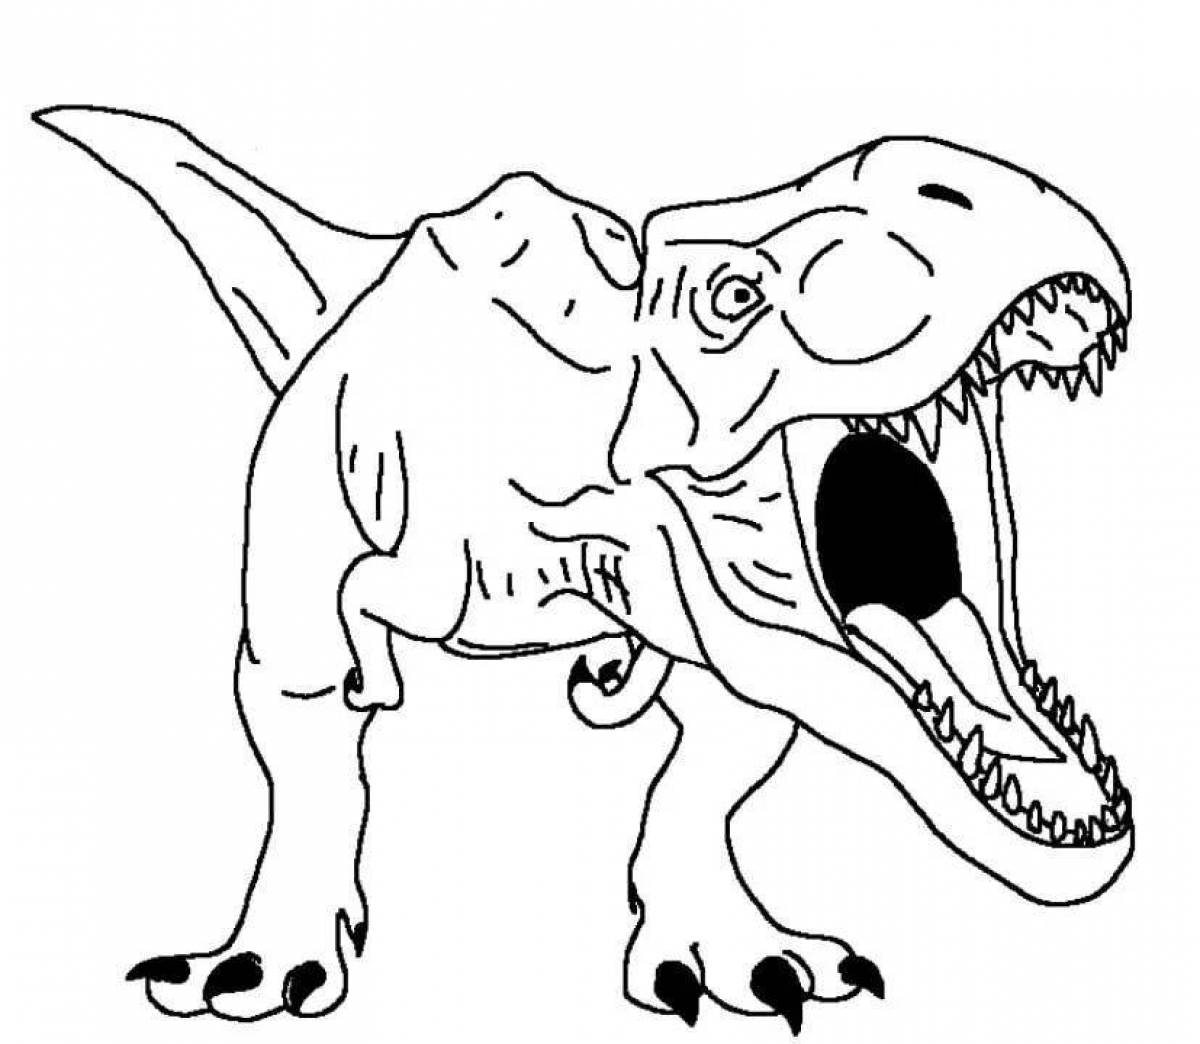 Exciting dinosaur coloring book